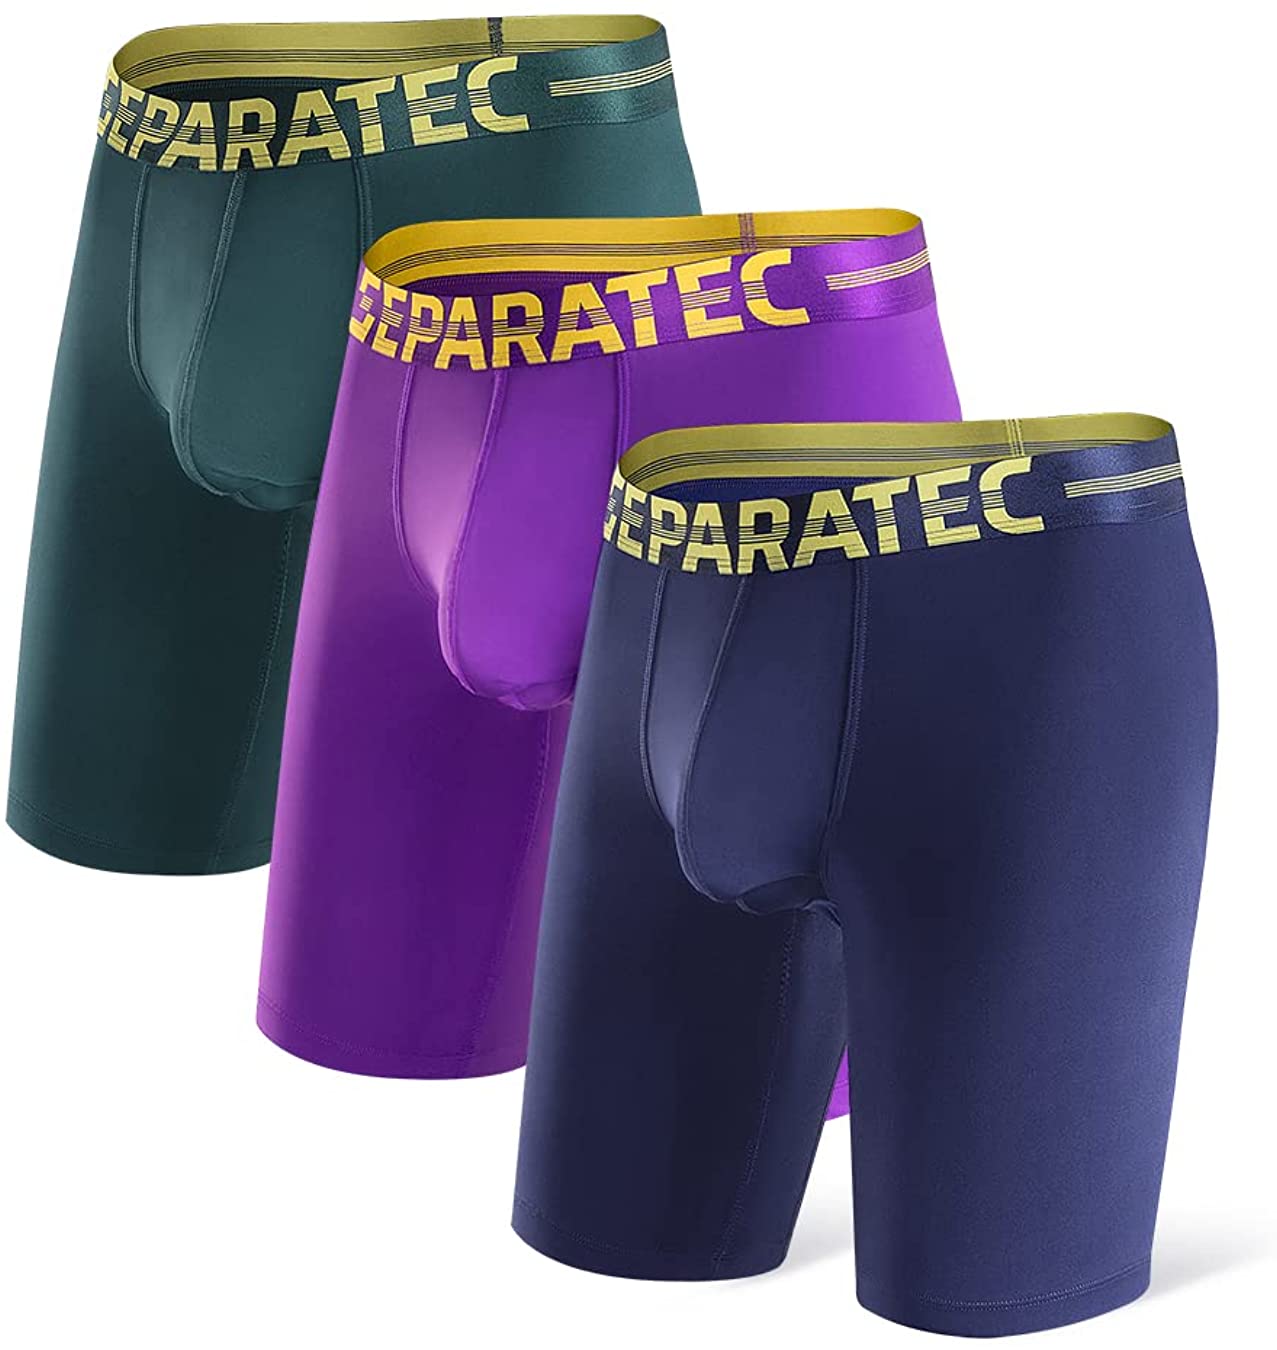 Separatec Underwear  Just like a perfect layup, Separatec's Dual